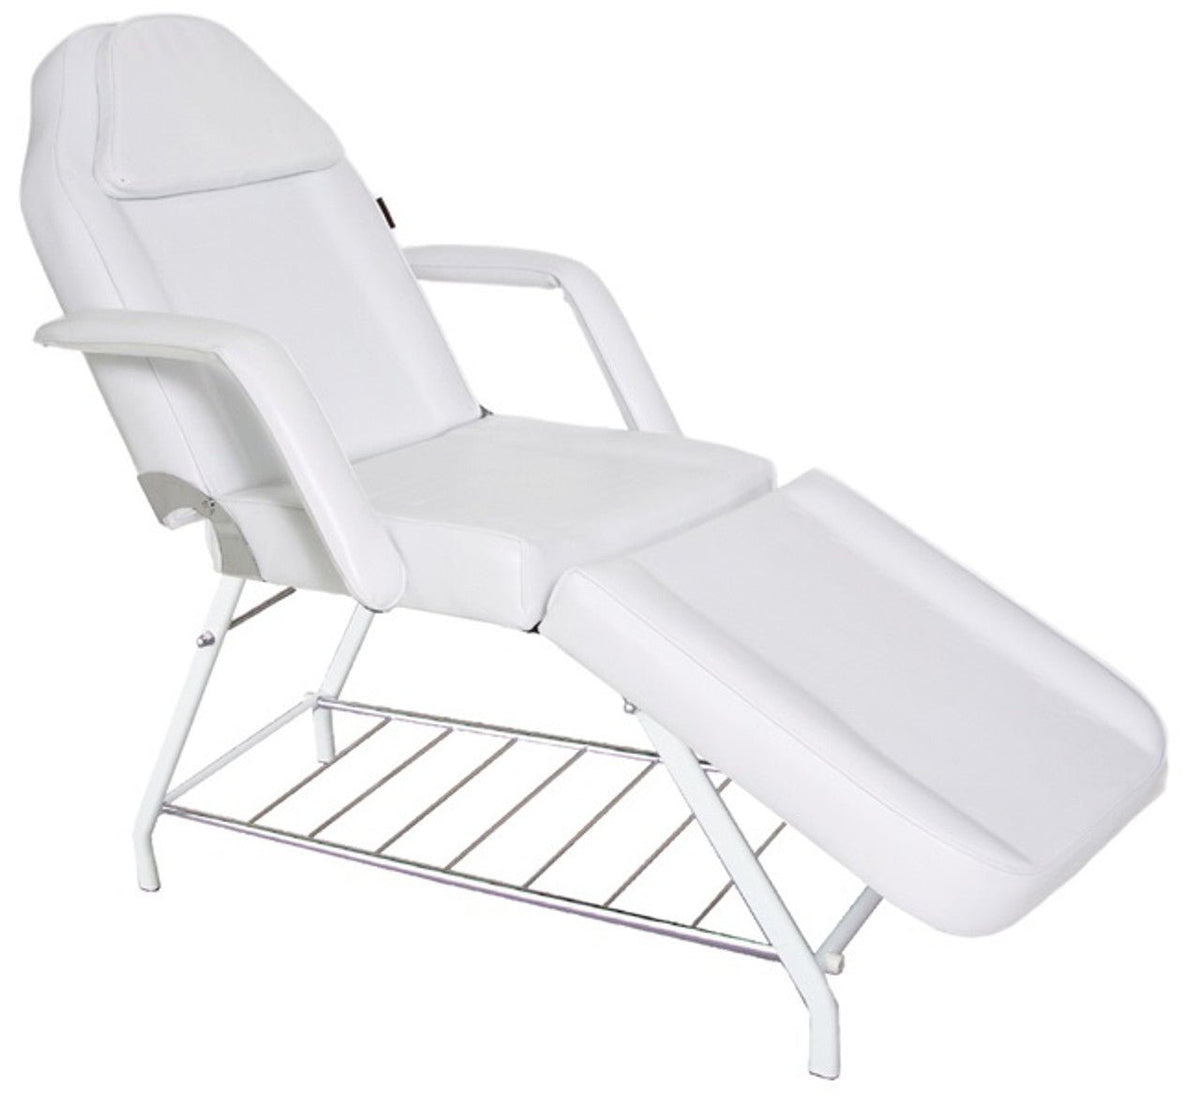 Joiken Tulip beauty salon bed in white colour with back rest in 45 degrees and leg rest partially extended